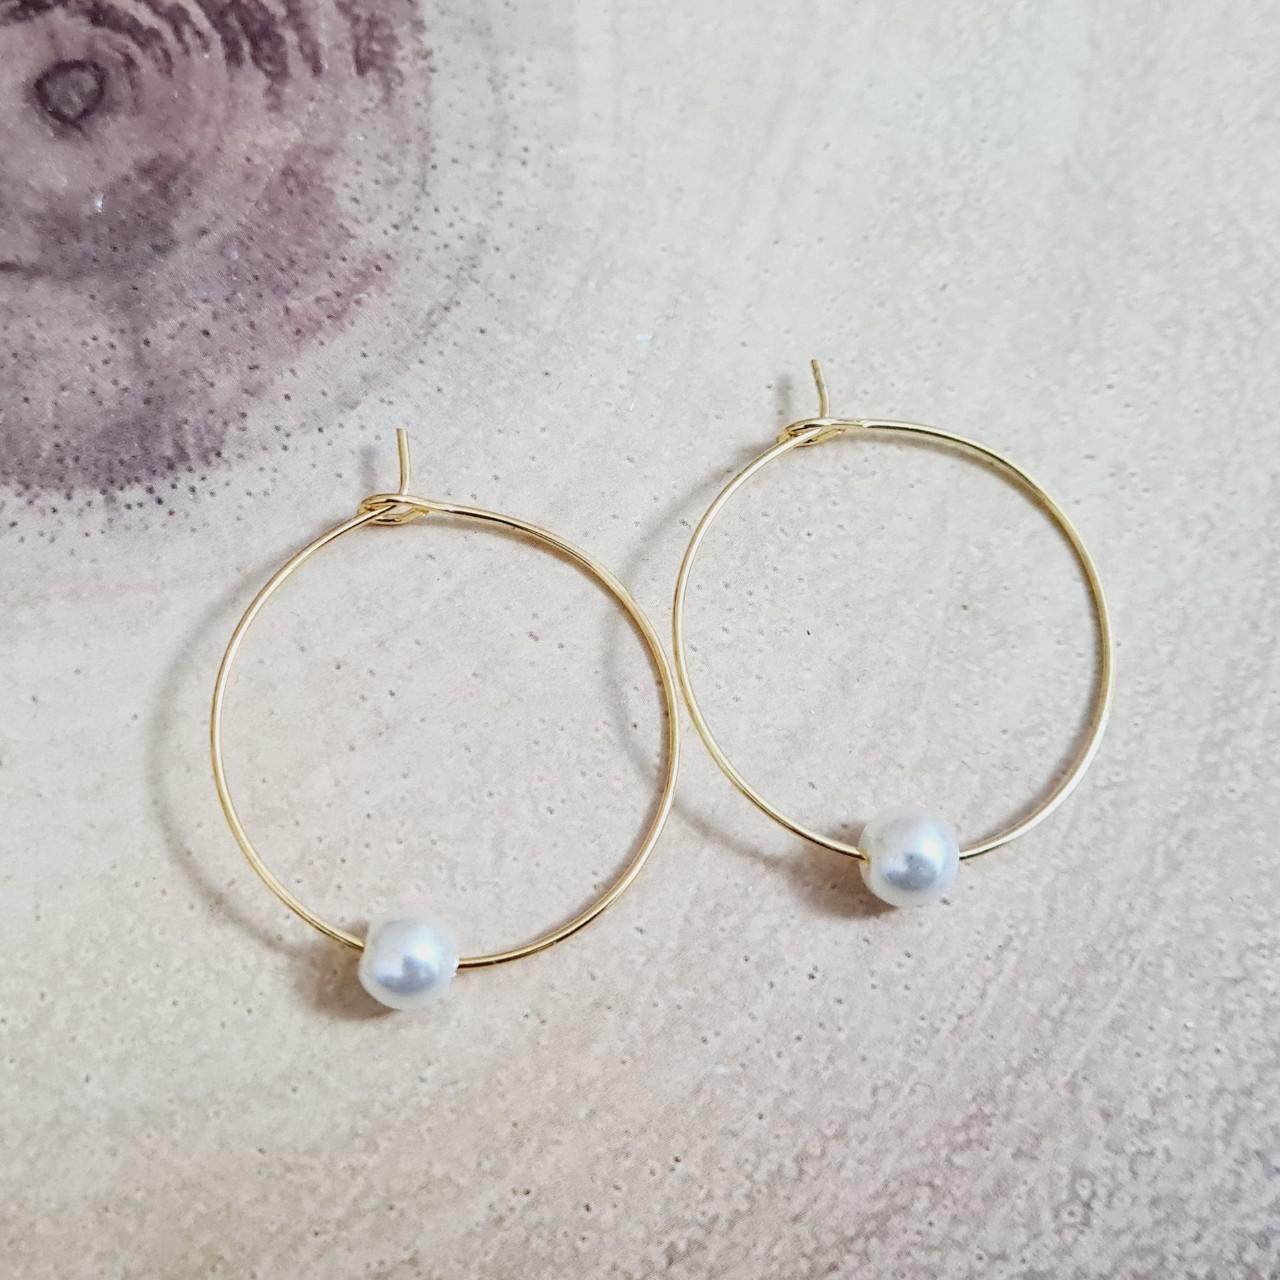 Unbranded Women's White and Gold Jewellery (2)